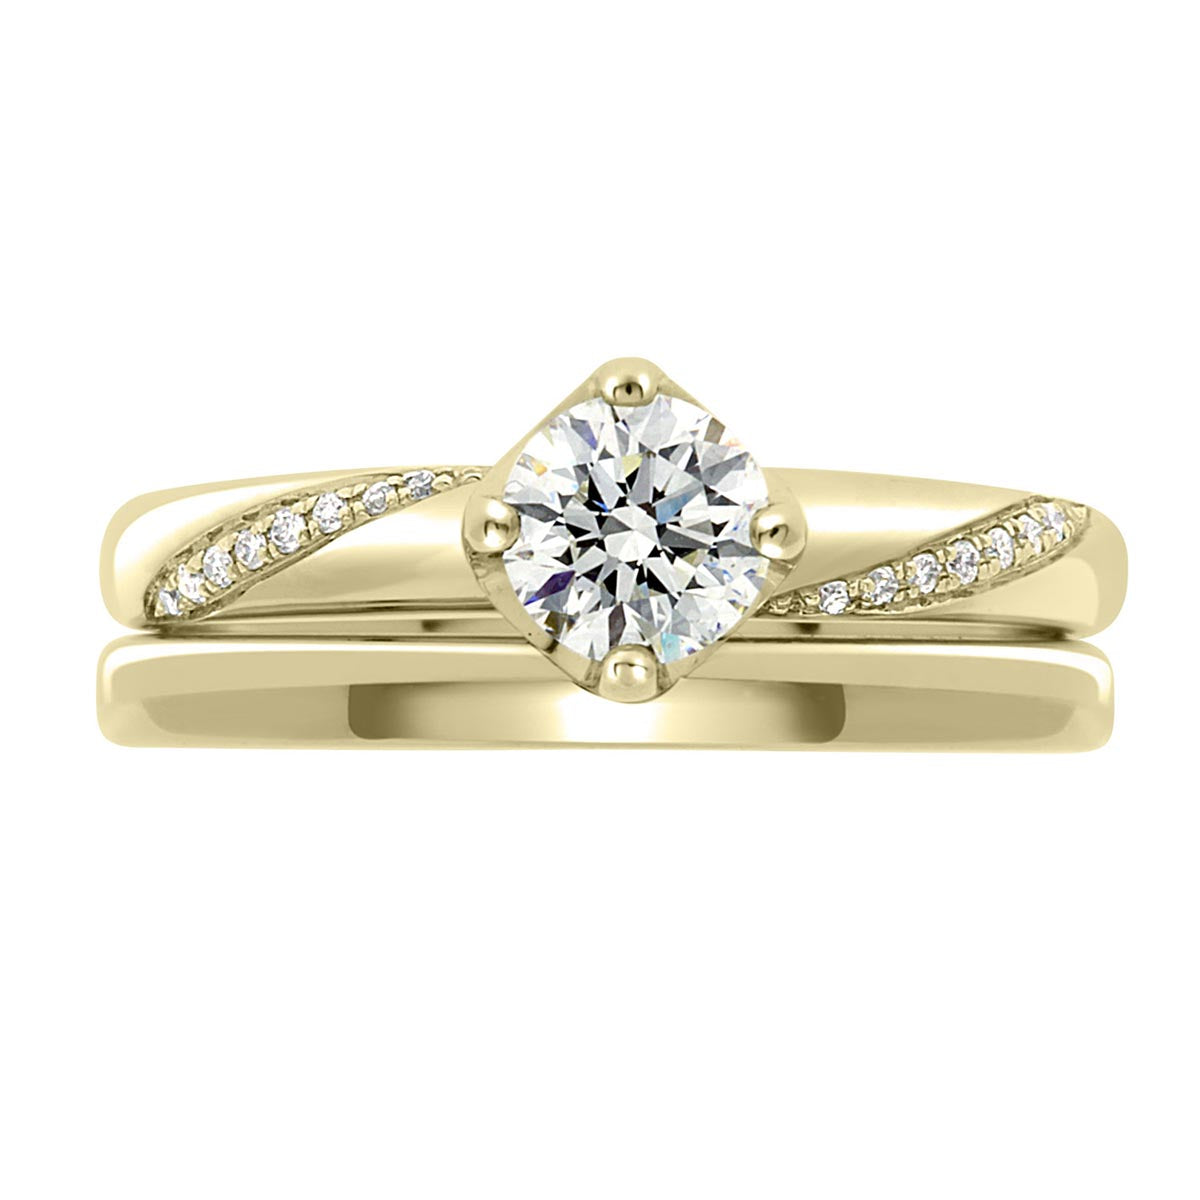 Crossover Band Engagement Ring made from yellow gold pictured with a plain wedding ring